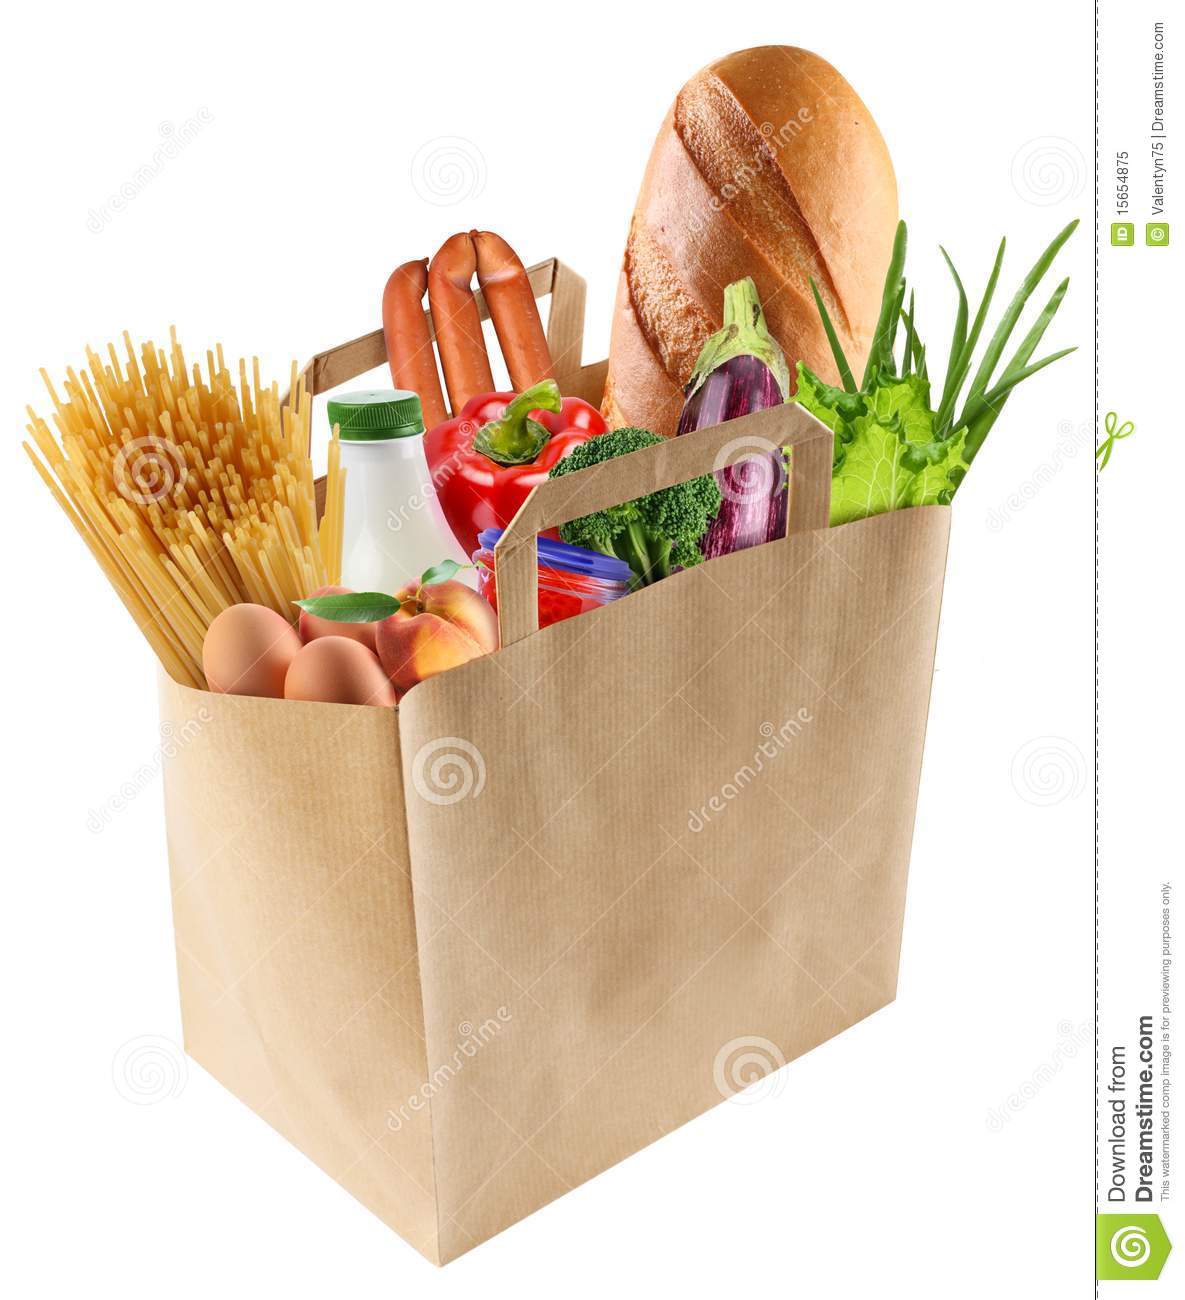 Paper Bag With Food On A White Background Mr No Pr No 5 5254 78